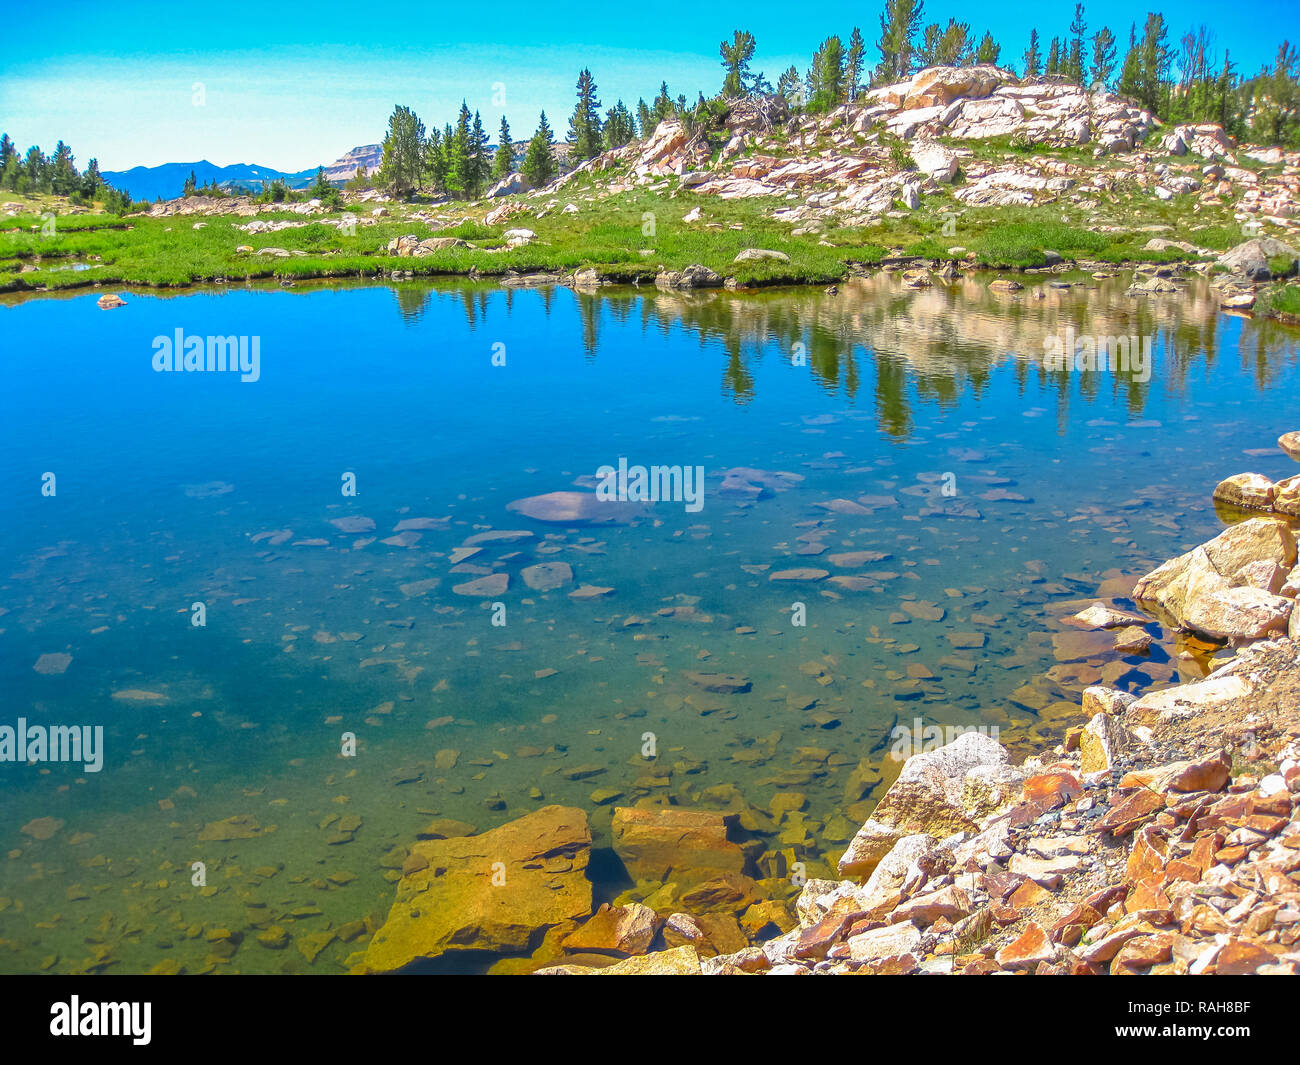 Clear waters of Alpine lake along Beartooth Highway, Northeast gateway of Yellowstone National Park. Beartooth Highway, the most beautiful drive in America, section of Route 212, Montana and Wyoming. Stock Photo